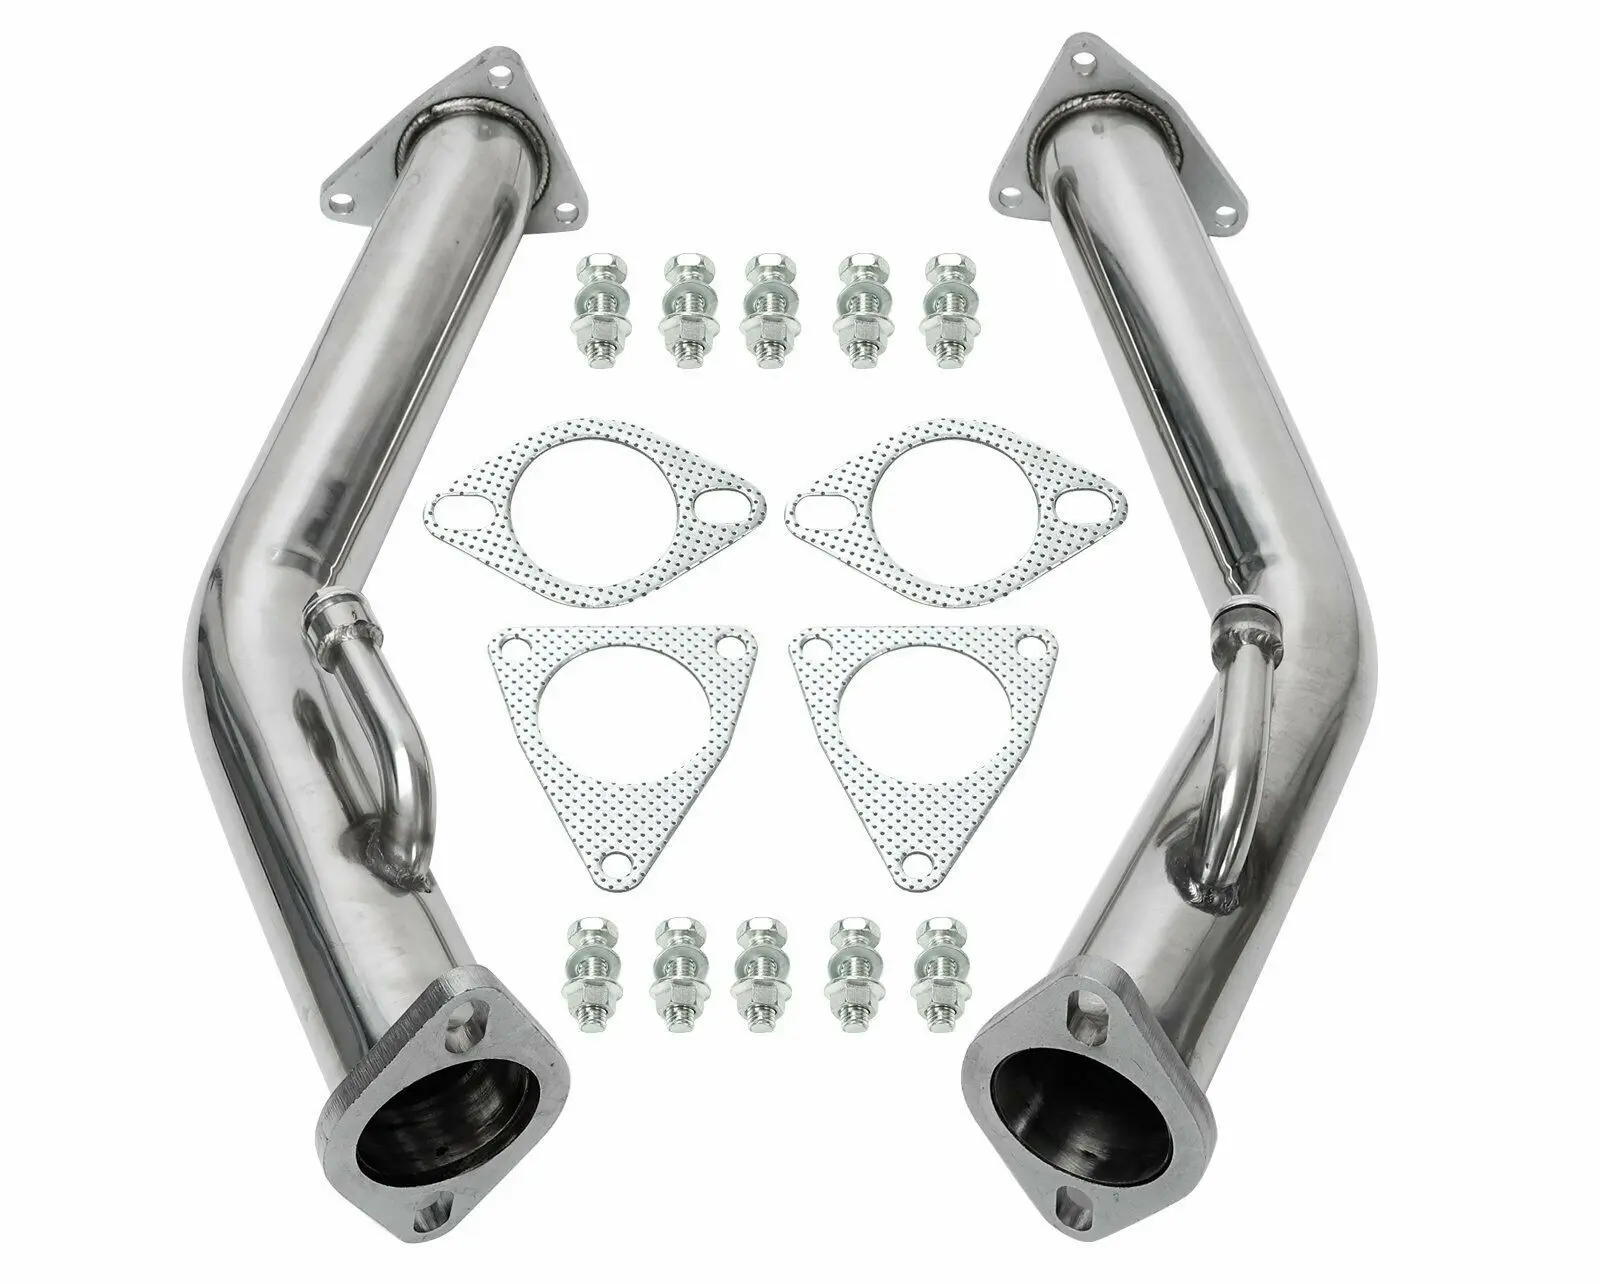 Downpipe Exhaust For 2003-2007 Nissan 350z/G35